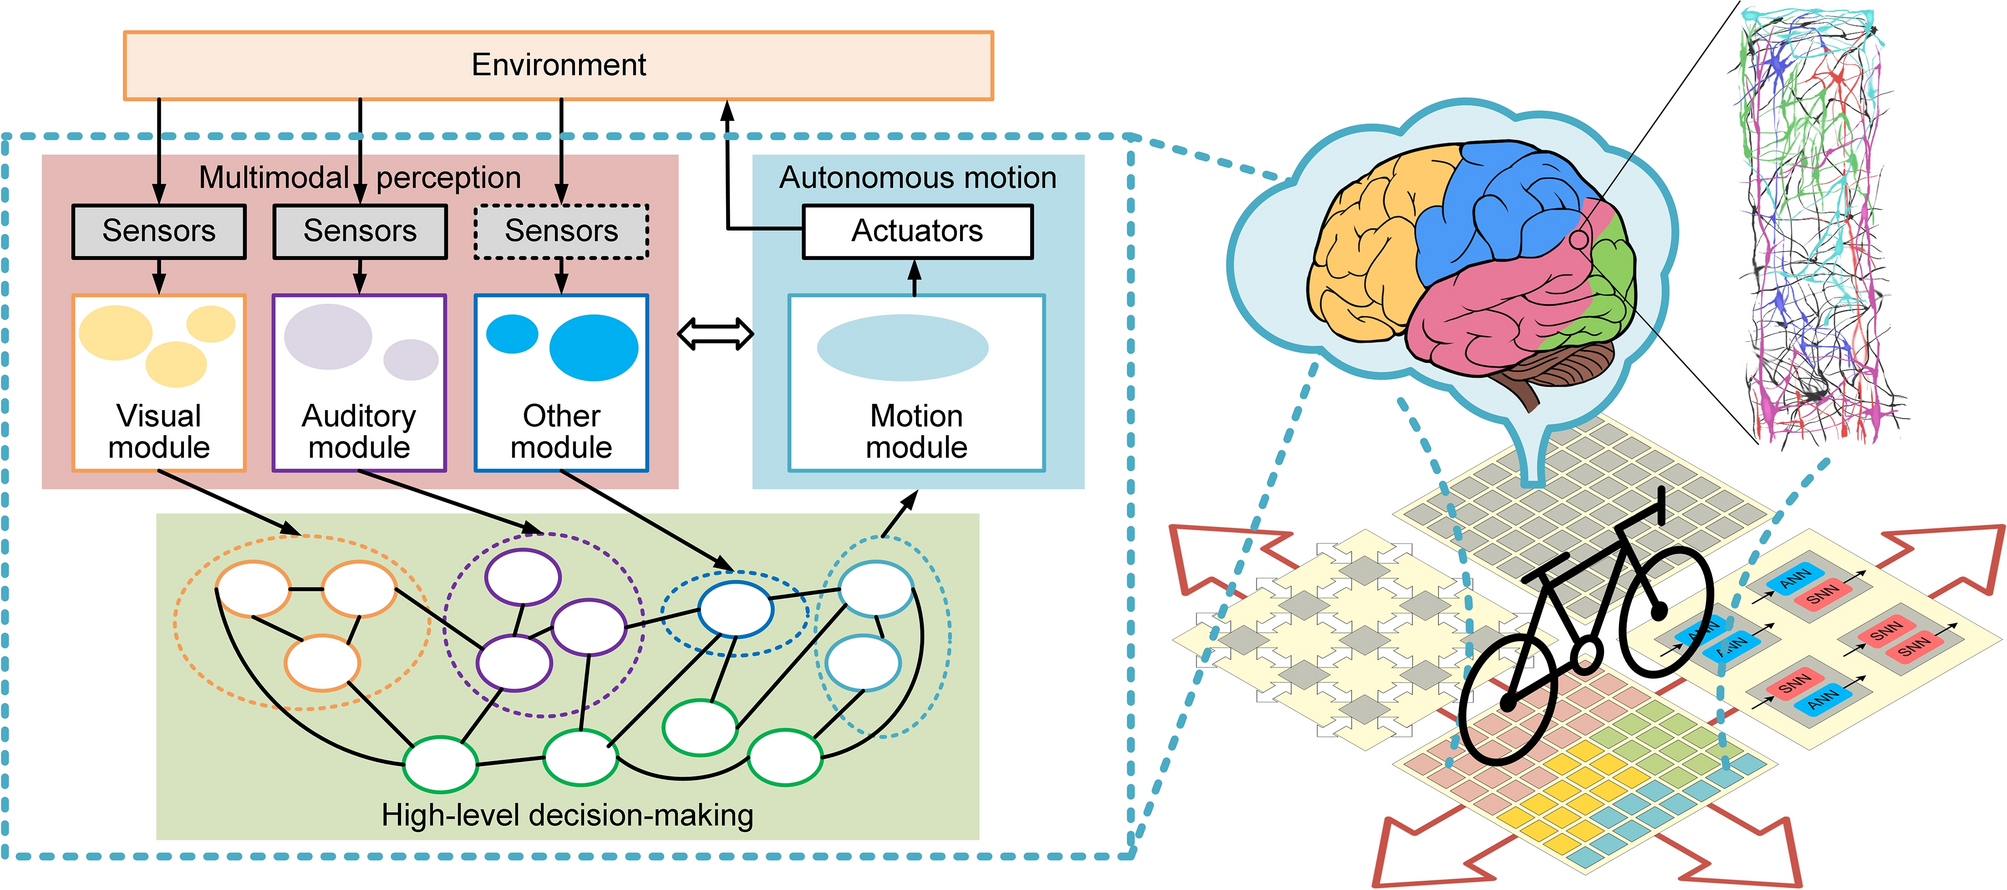 A hybrid and scalable brain-inspired robotic platform | Scientific Reports